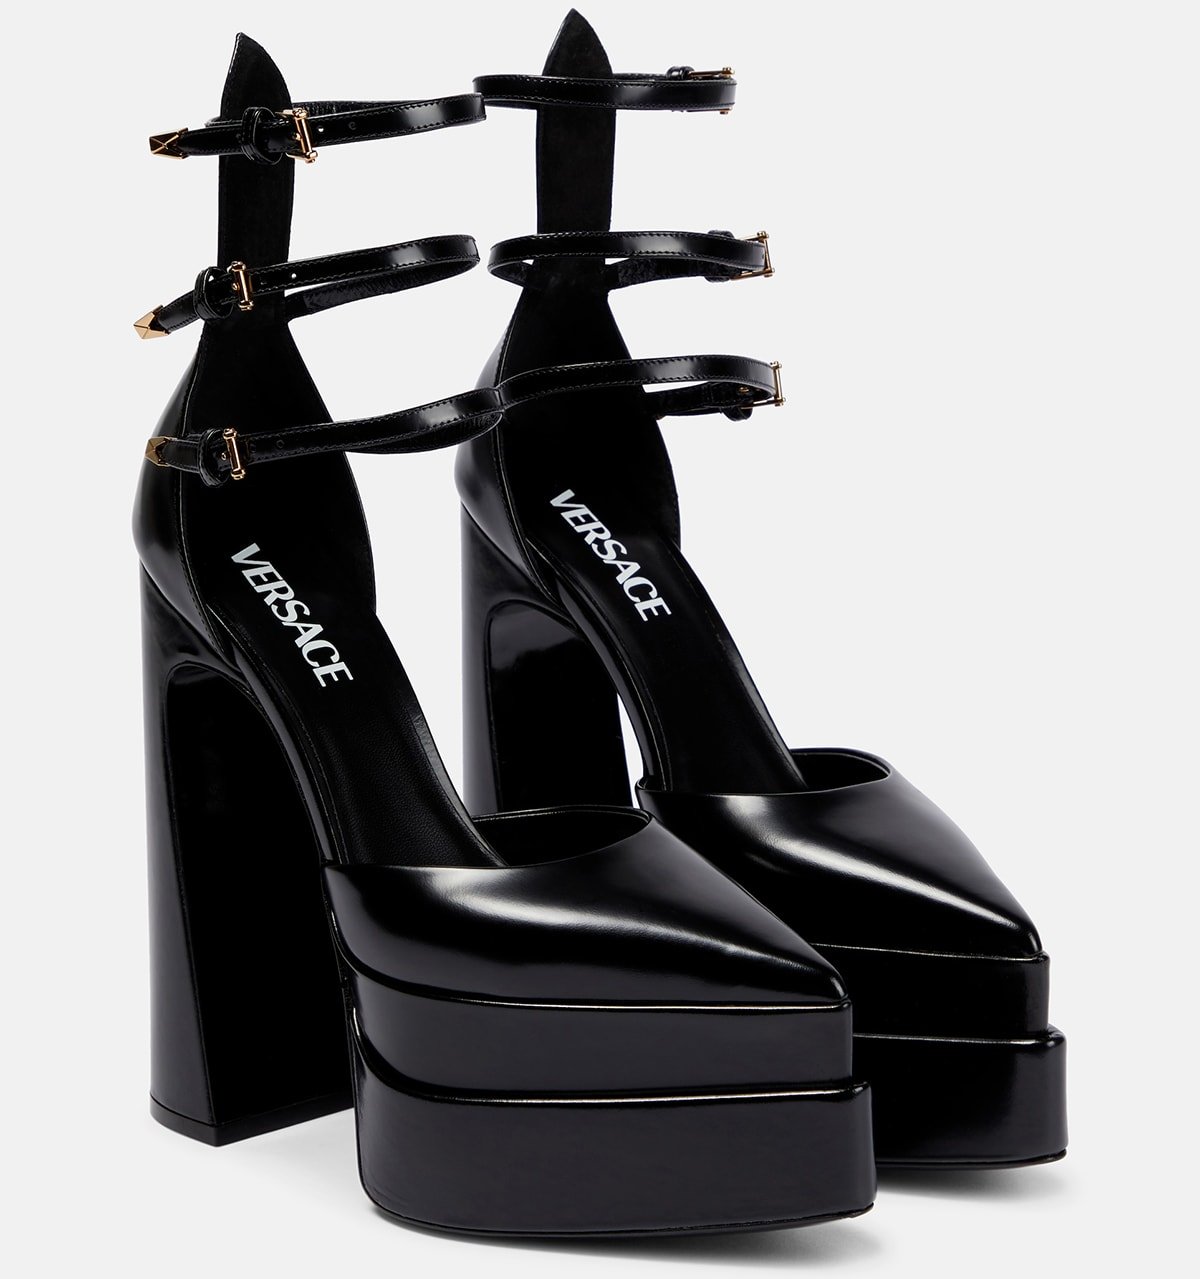 The Versace Aevitas Pointy Pumps have two-tiered pointed platforms, triple ankle straps, and high block heels